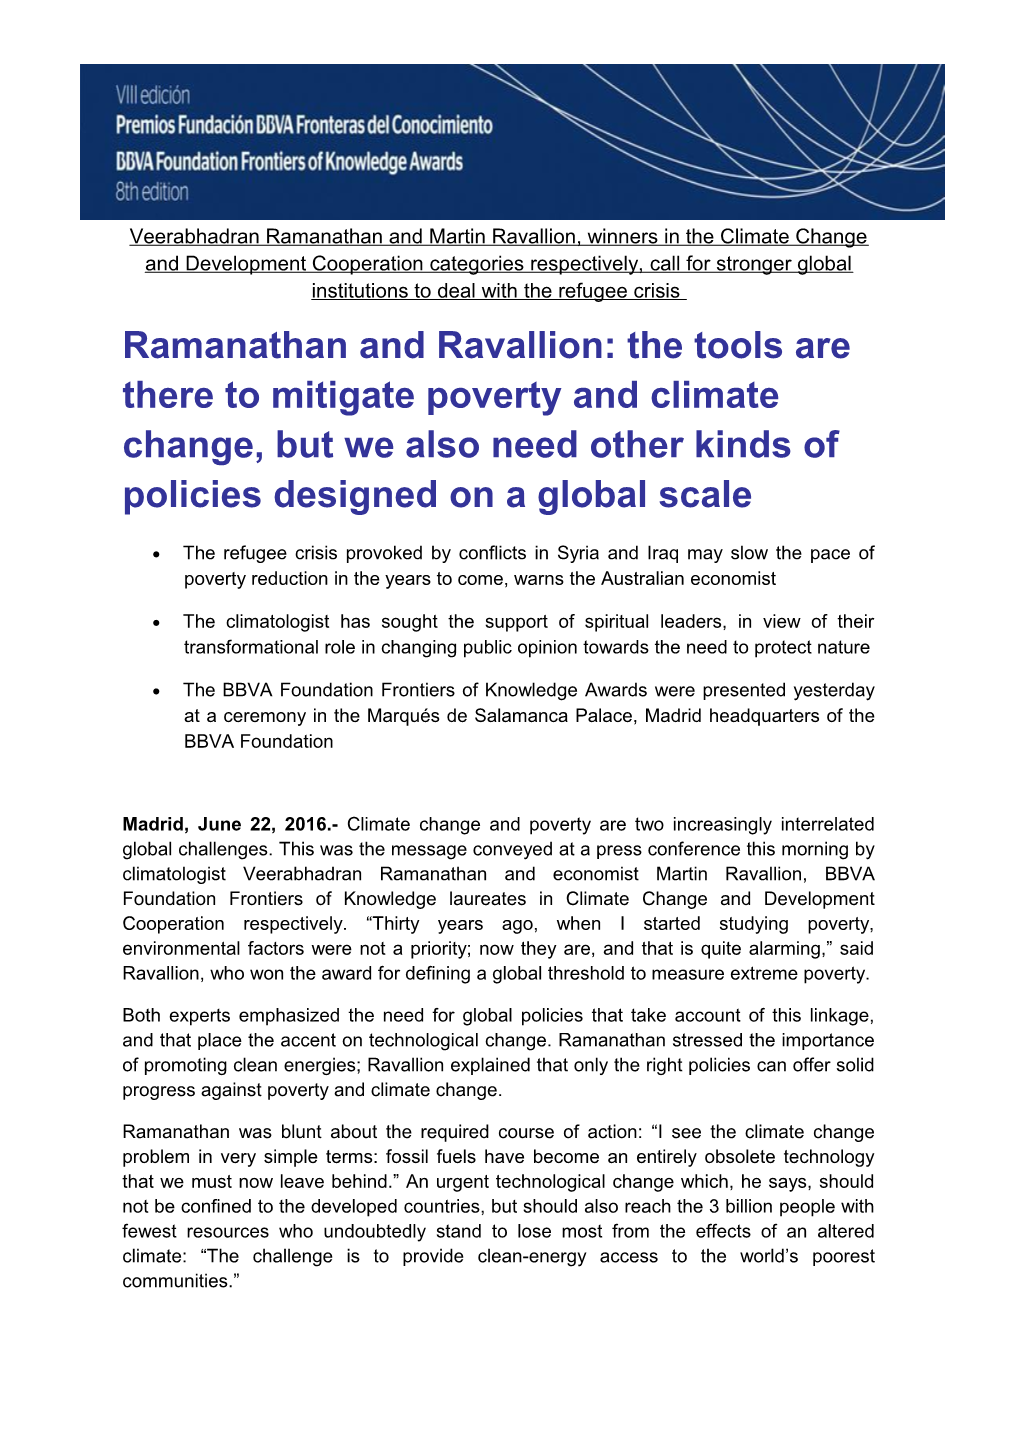 Ramanathan and Ravallion: the Tools Are There to Mitigate Poverty and Climate Change